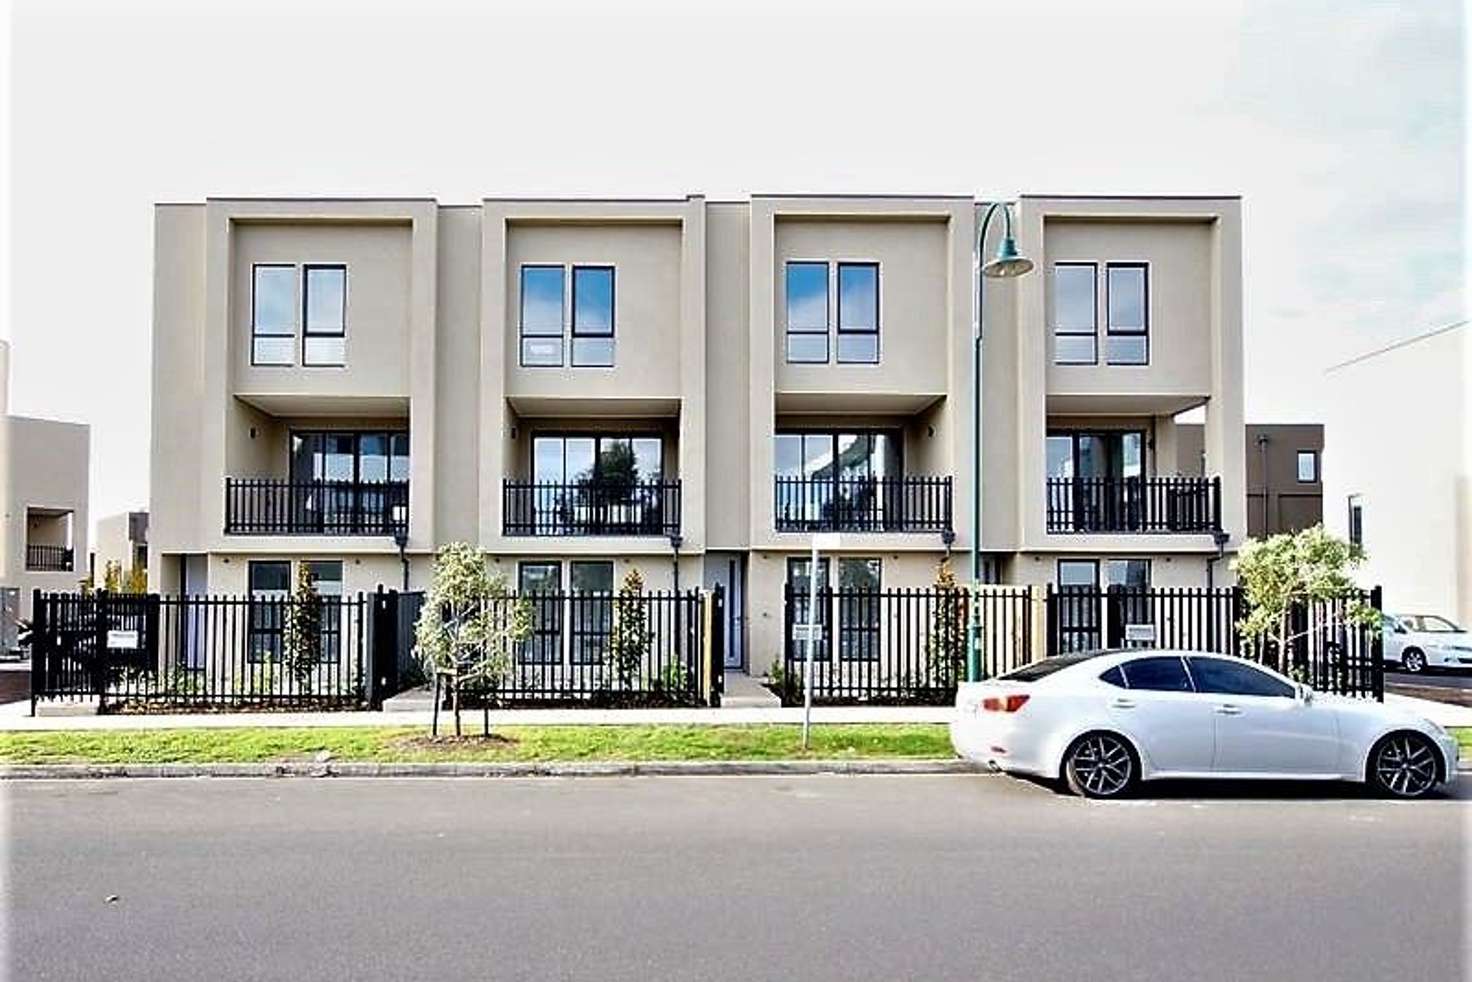 Main view of Homely townhouse listing, 51 Crefden St, Maidstone VIC 3012